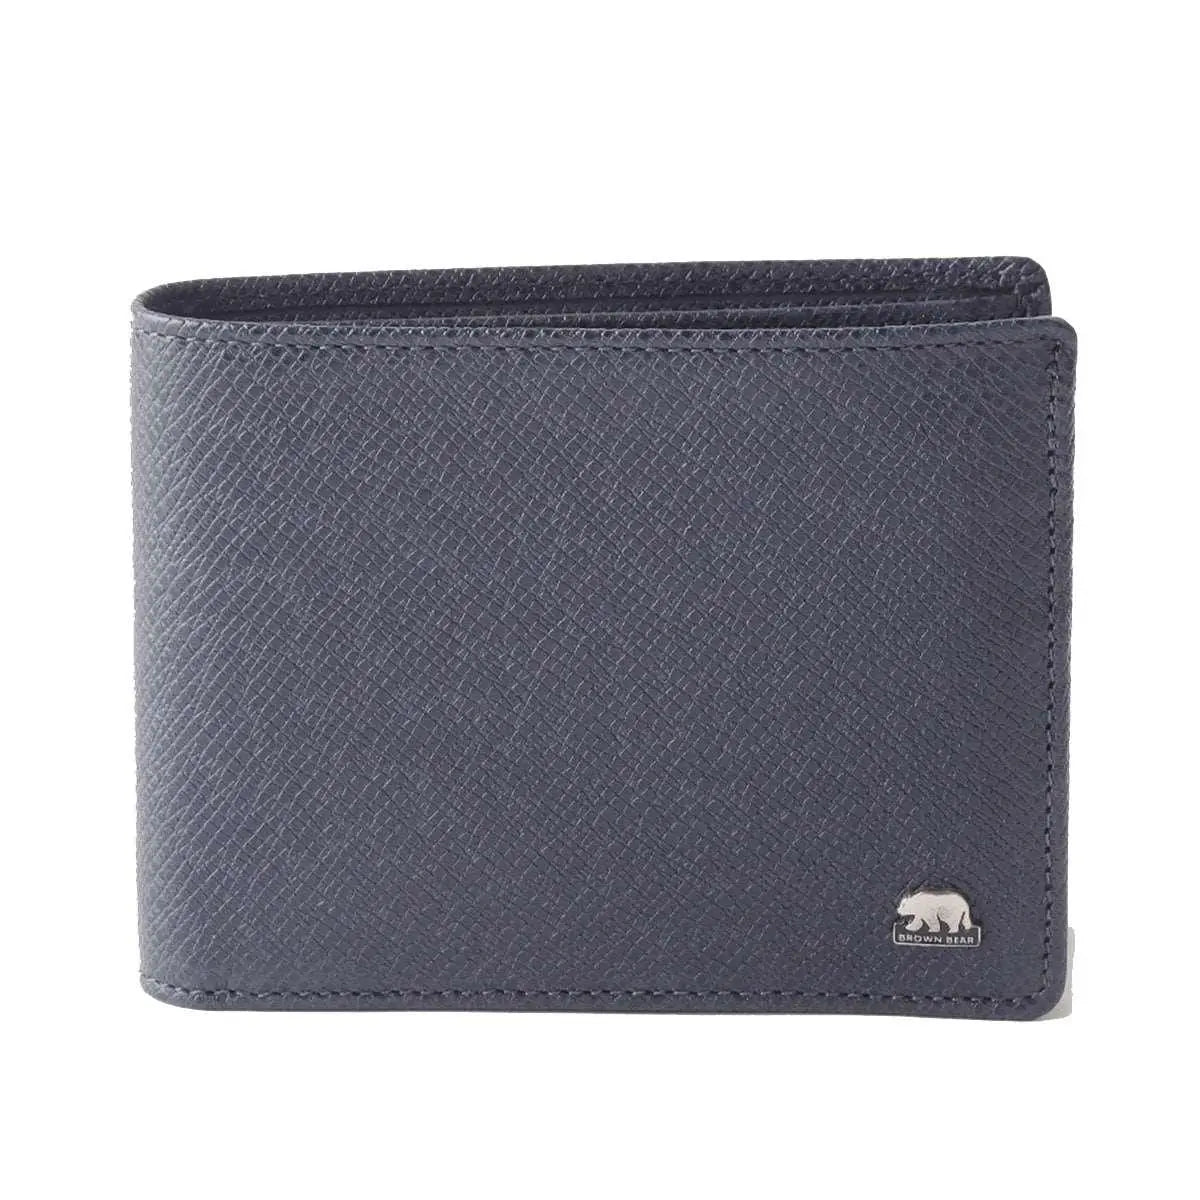 Contacts Small Compact Bifold Leather Wallet Pocket India | Ubuy